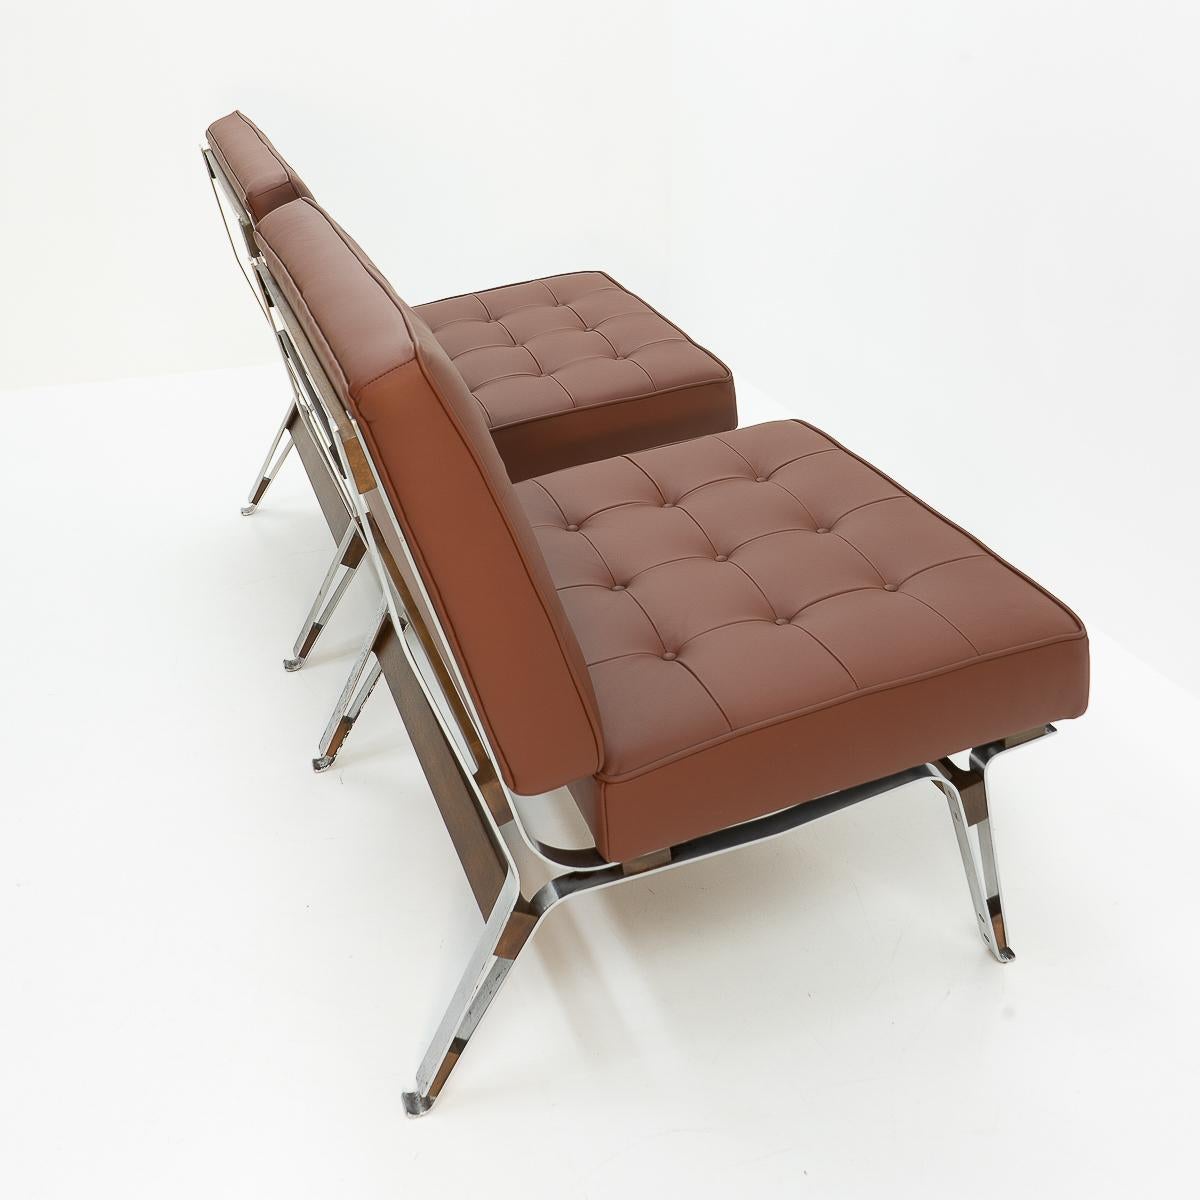 Rare Italian Design: Ico Parisi 856 Lounge Chairs for Cassina, 1950s For Sale 2